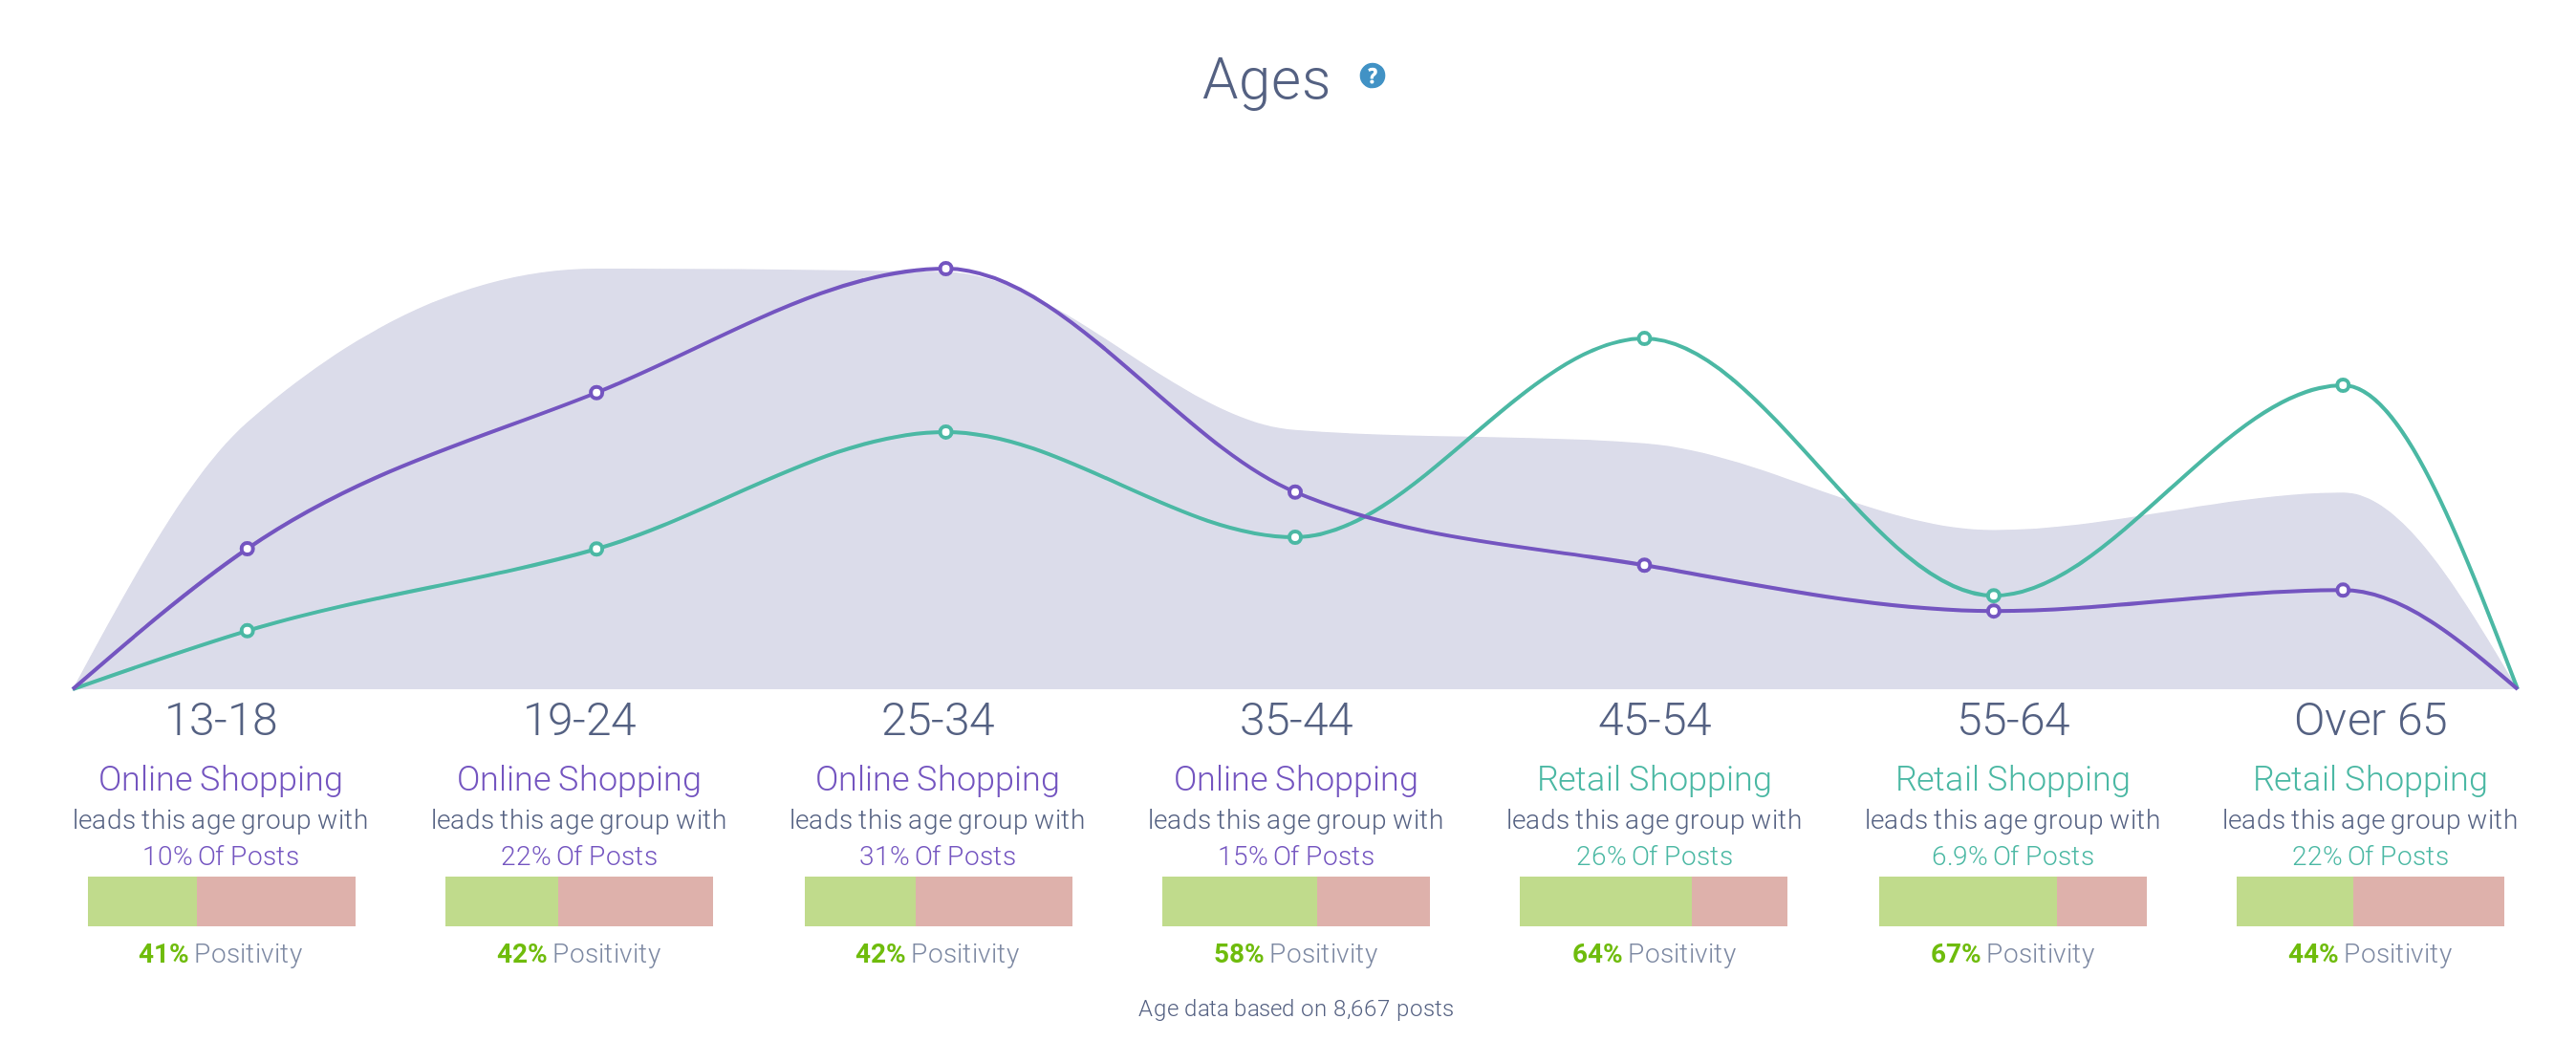 Online Shopping Ages vs Retail